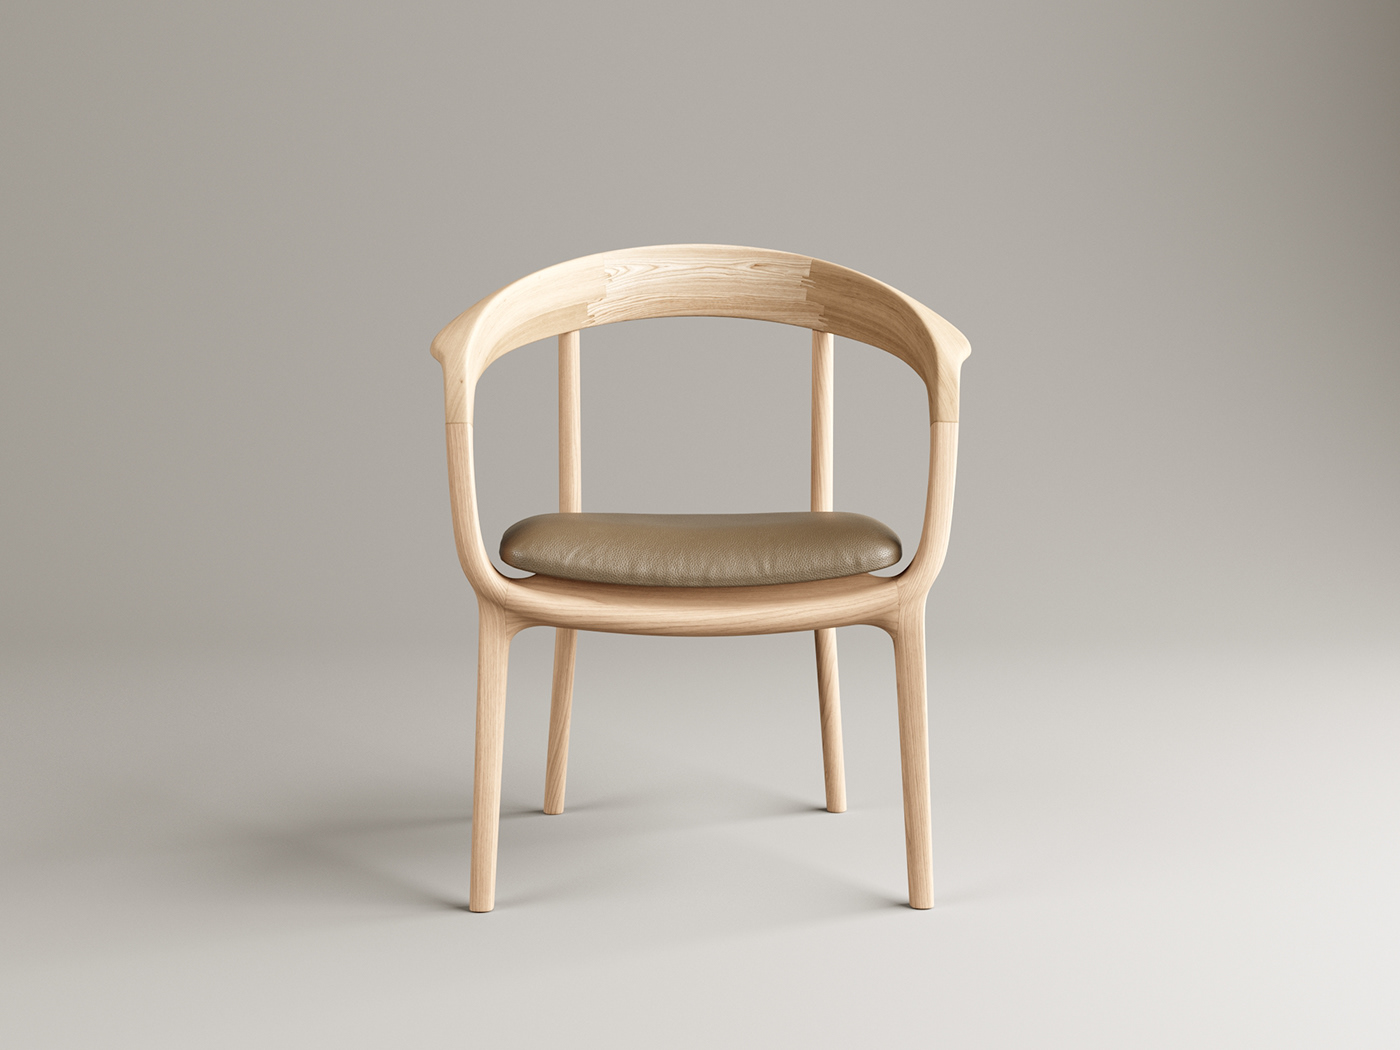 FREE 3D MODEL of Chair on Behance